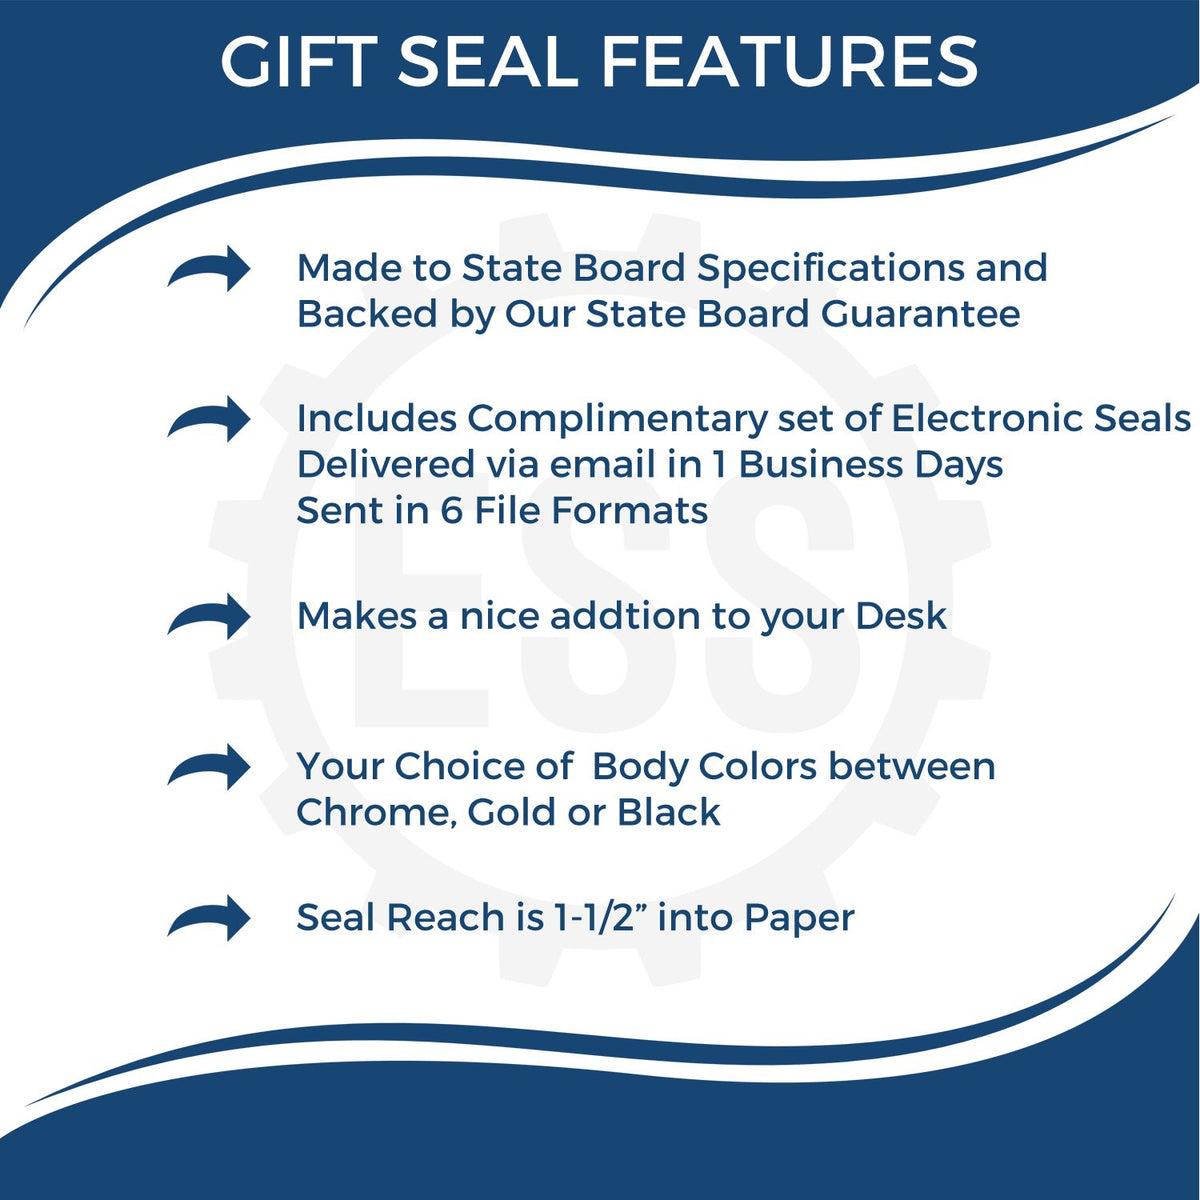 A picture of an infographic highlighting the selling points for the Gift Montana Geologist Seal